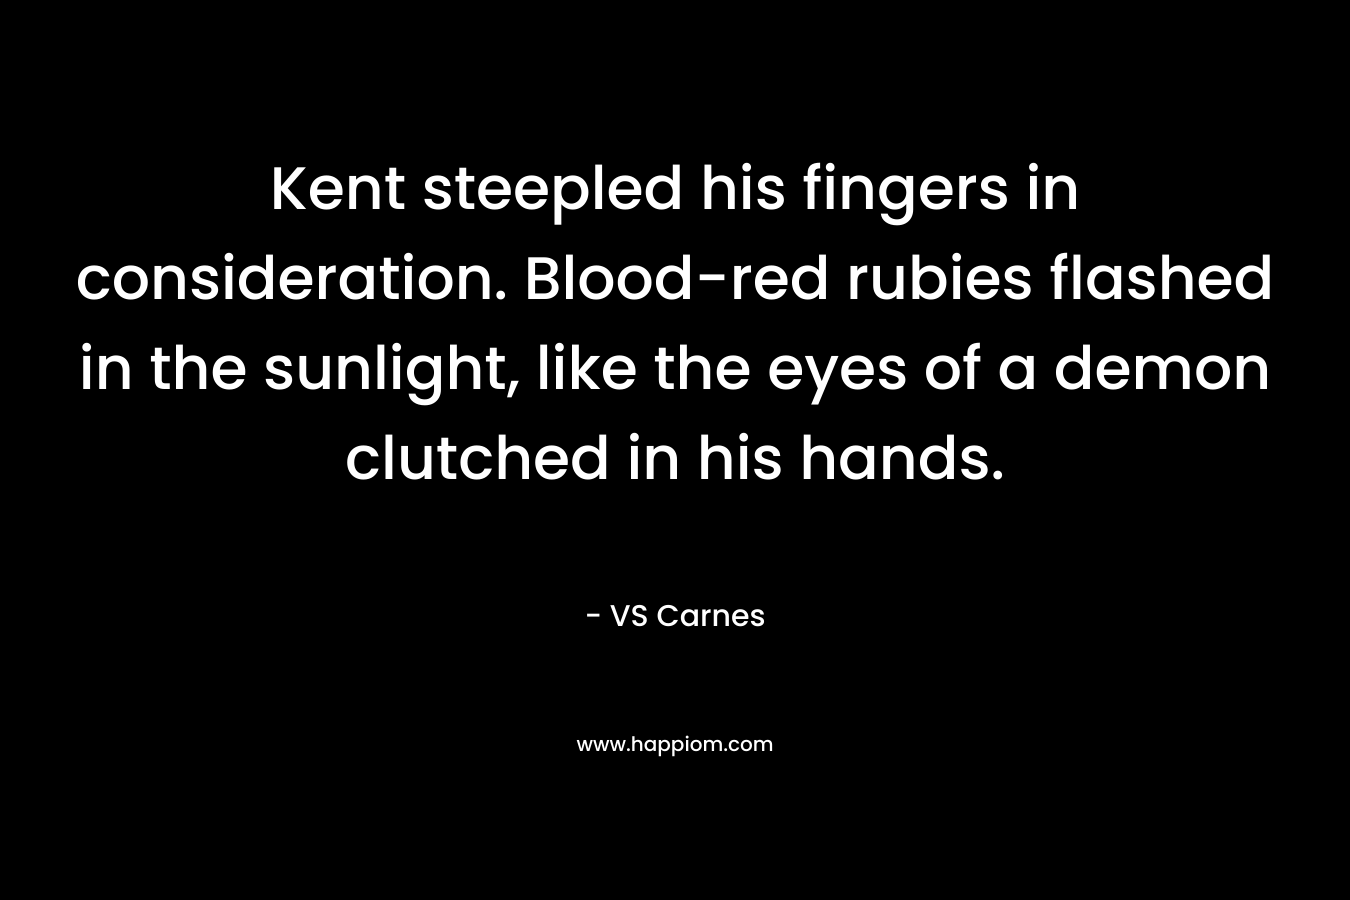 Kent steepled his fingers in consideration. Blood-red rubies flashed in the sunlight, like the eyes of a demon clutched in his hands. – VS Carnes